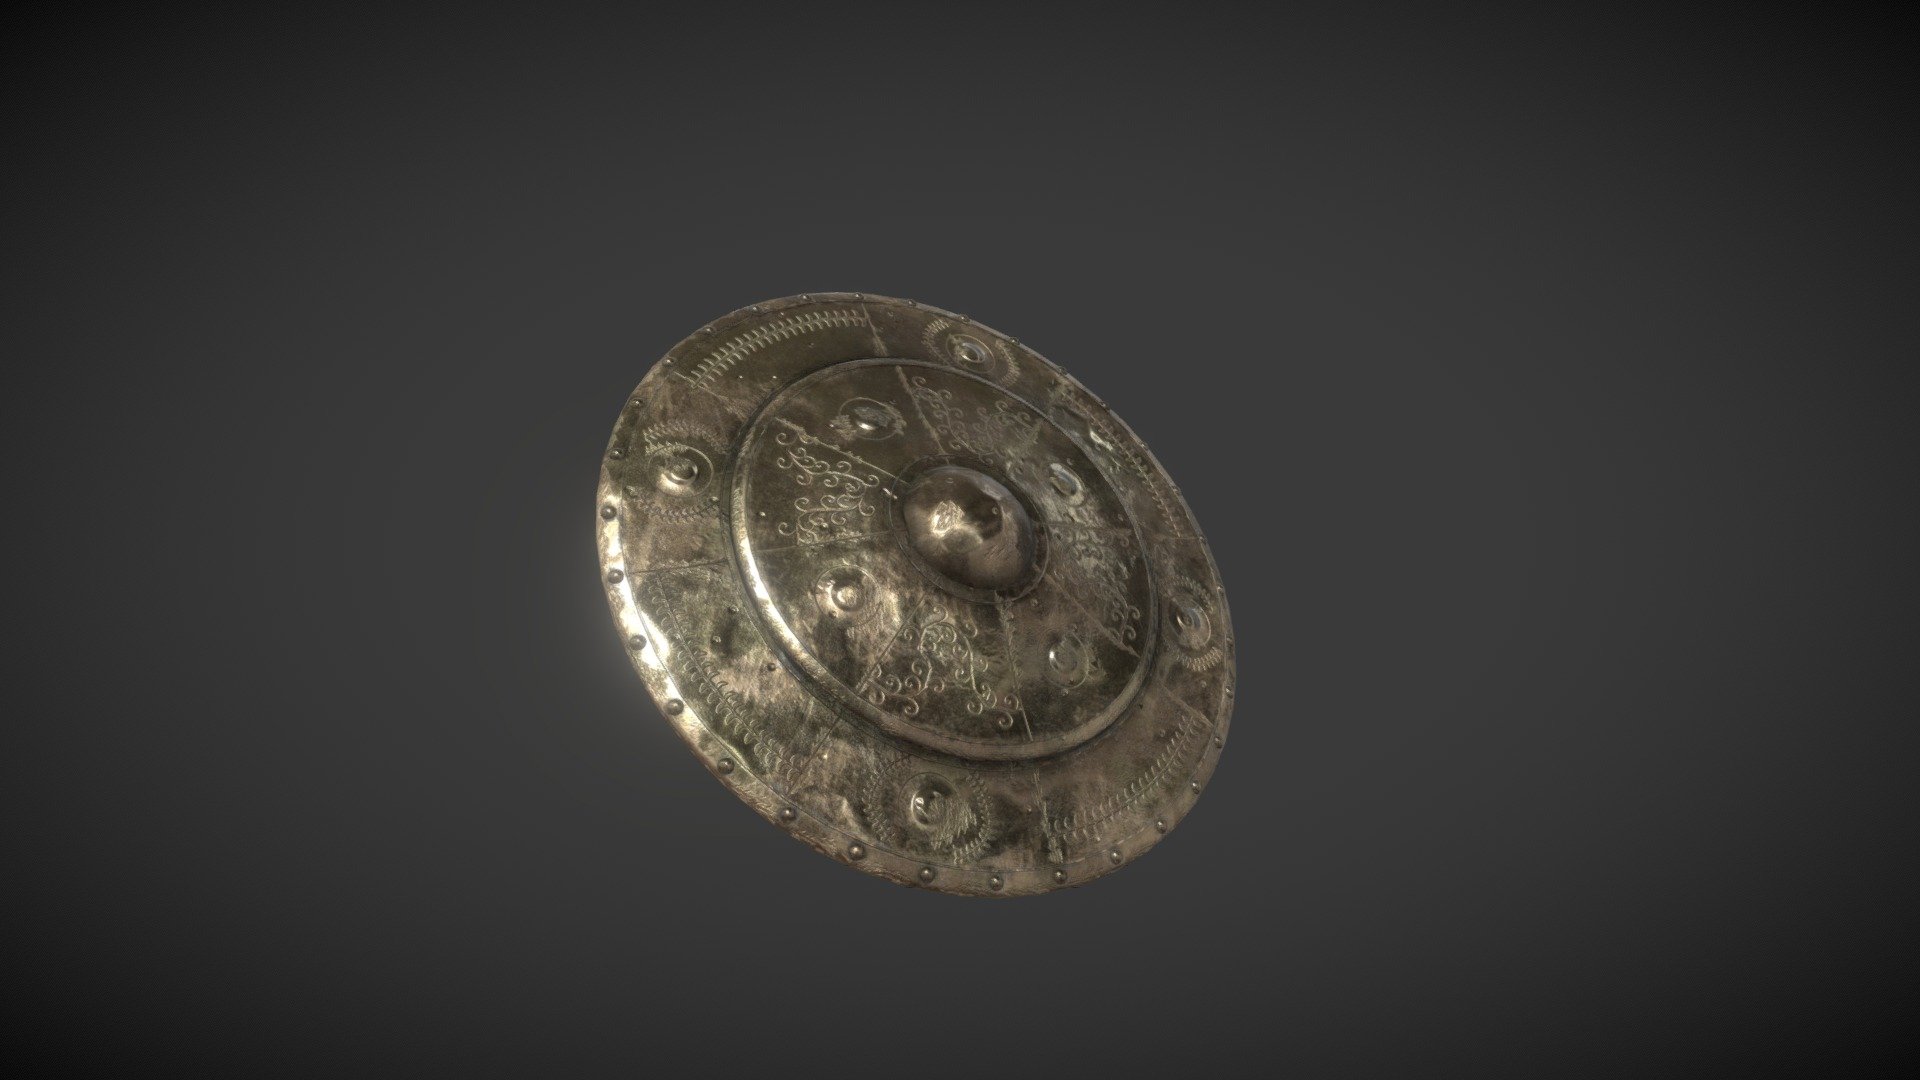 Here is a Bronze Shield I made as part of my Masters Degree for a quick idea generation module. I took inspiration from both roman shields and vikings to come up with the design. This was modelled in Autodesk Maya and Textured in Substance Painter with an idea to put it into an environment later on 3d model